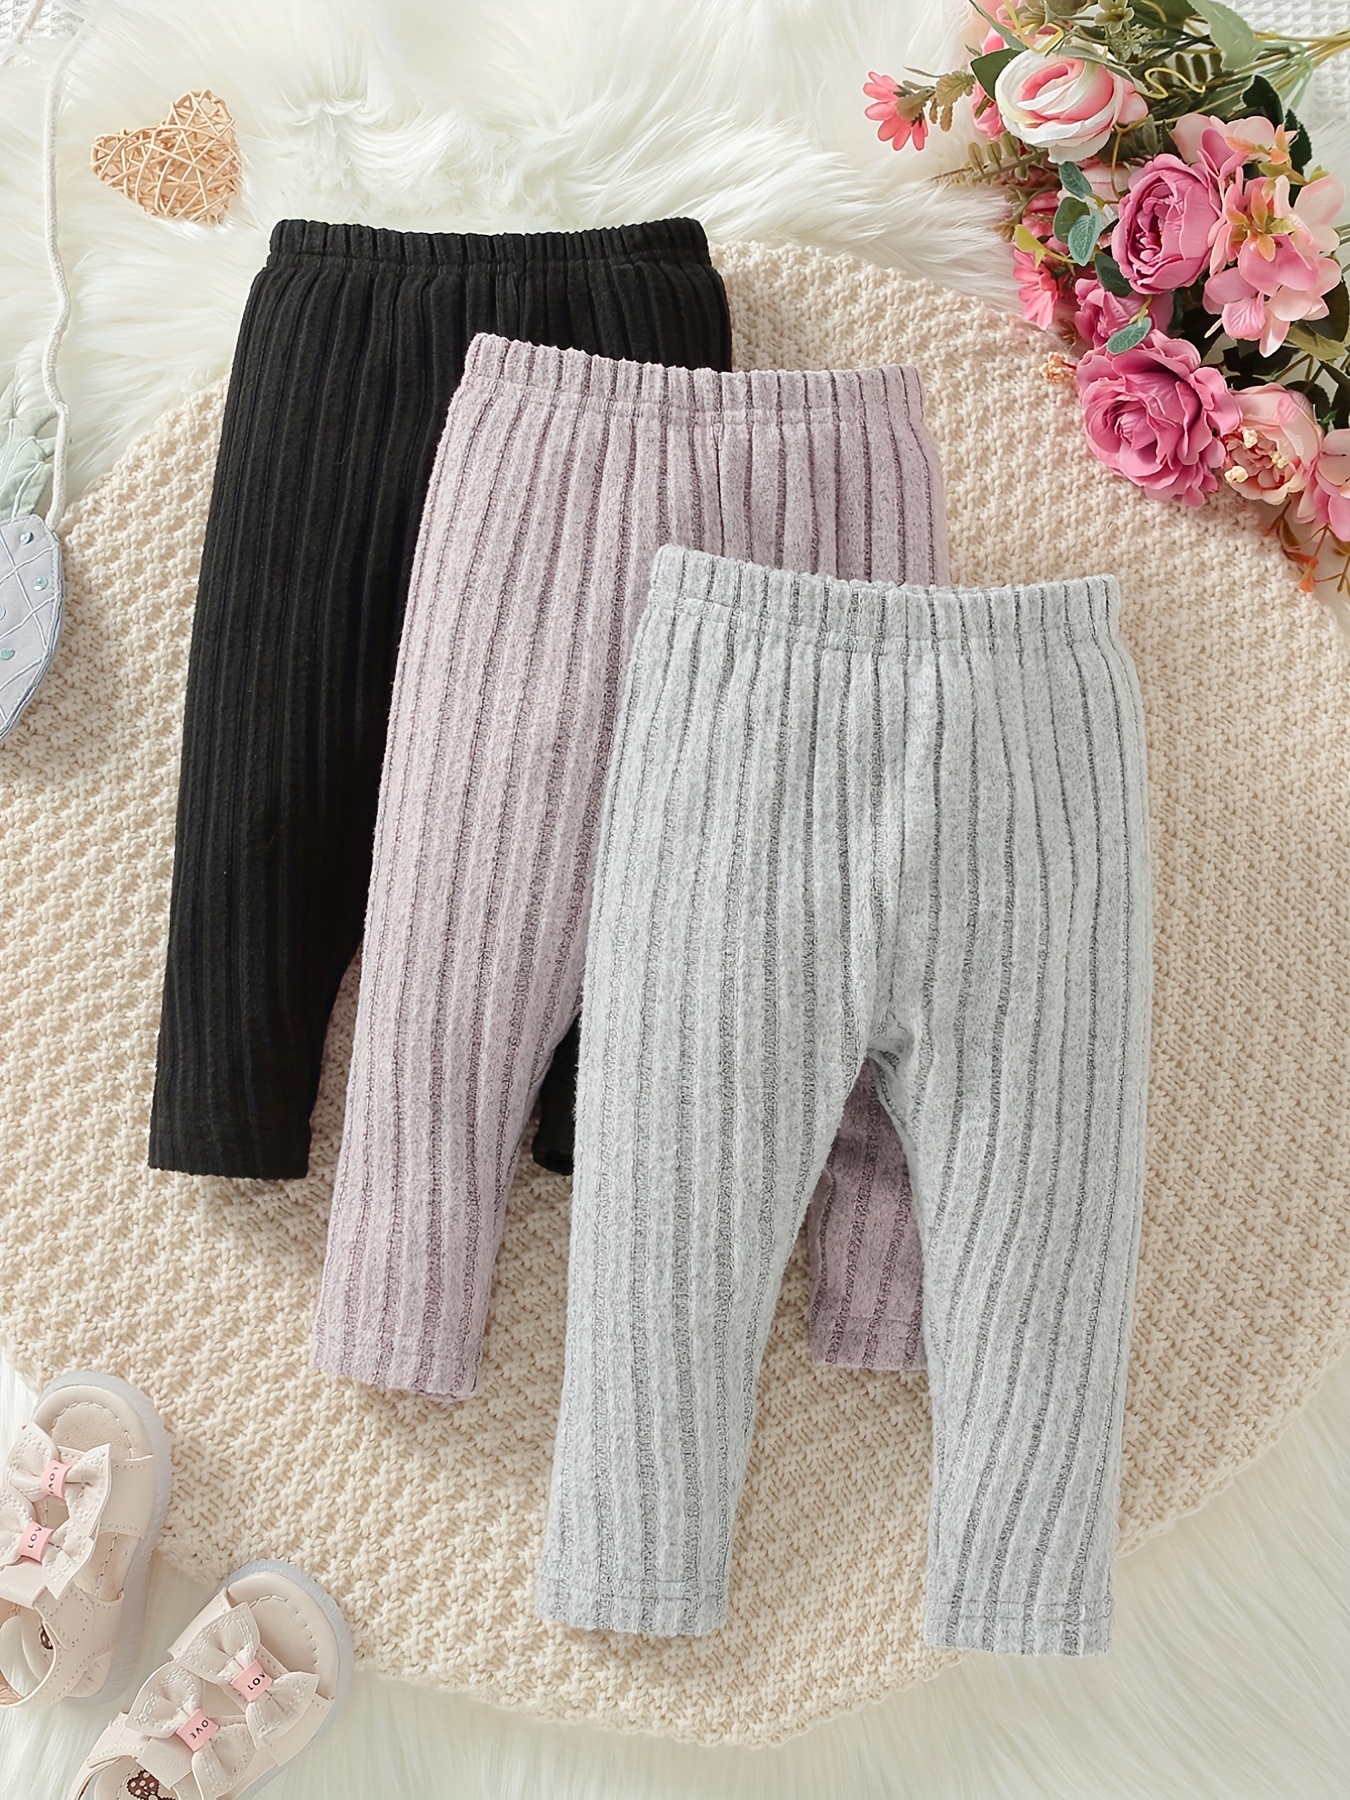 Baby Girls Stretch Soft Leggings Ruffle Knit Footless Tights Pants Kids  Clothes